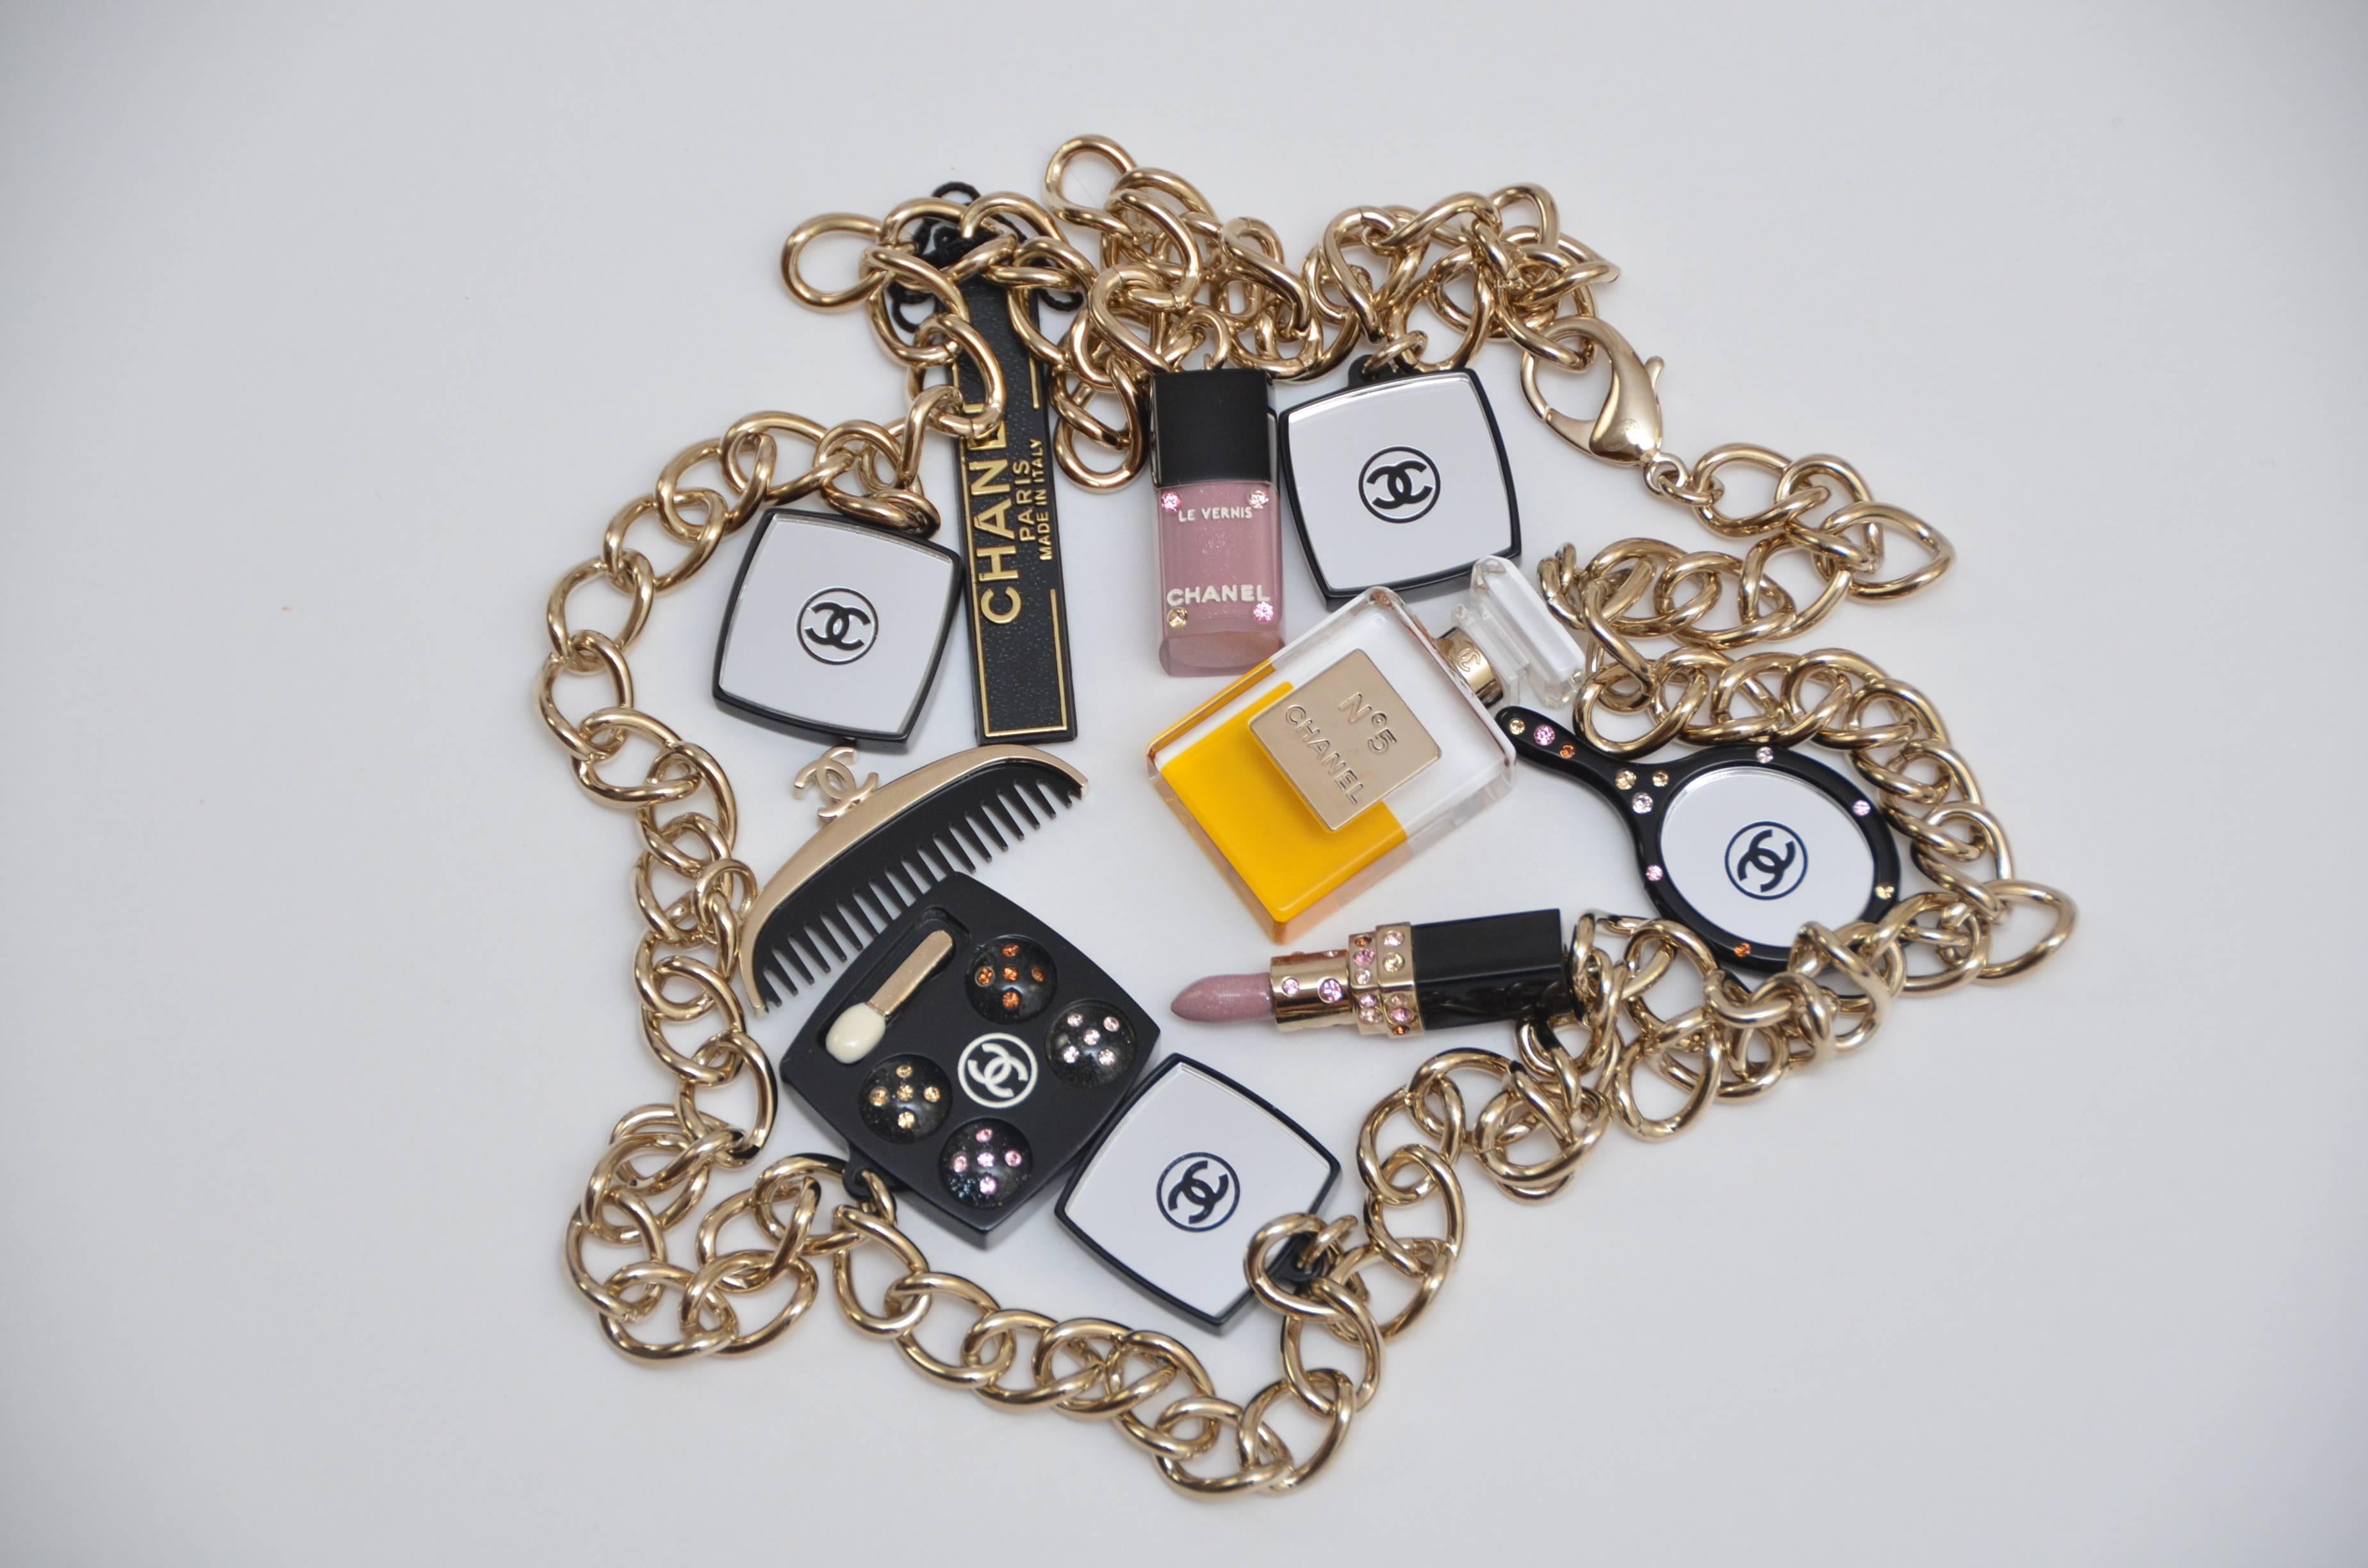 Rare CHANEL Makeup Charm Necklace 2008 NEW 2